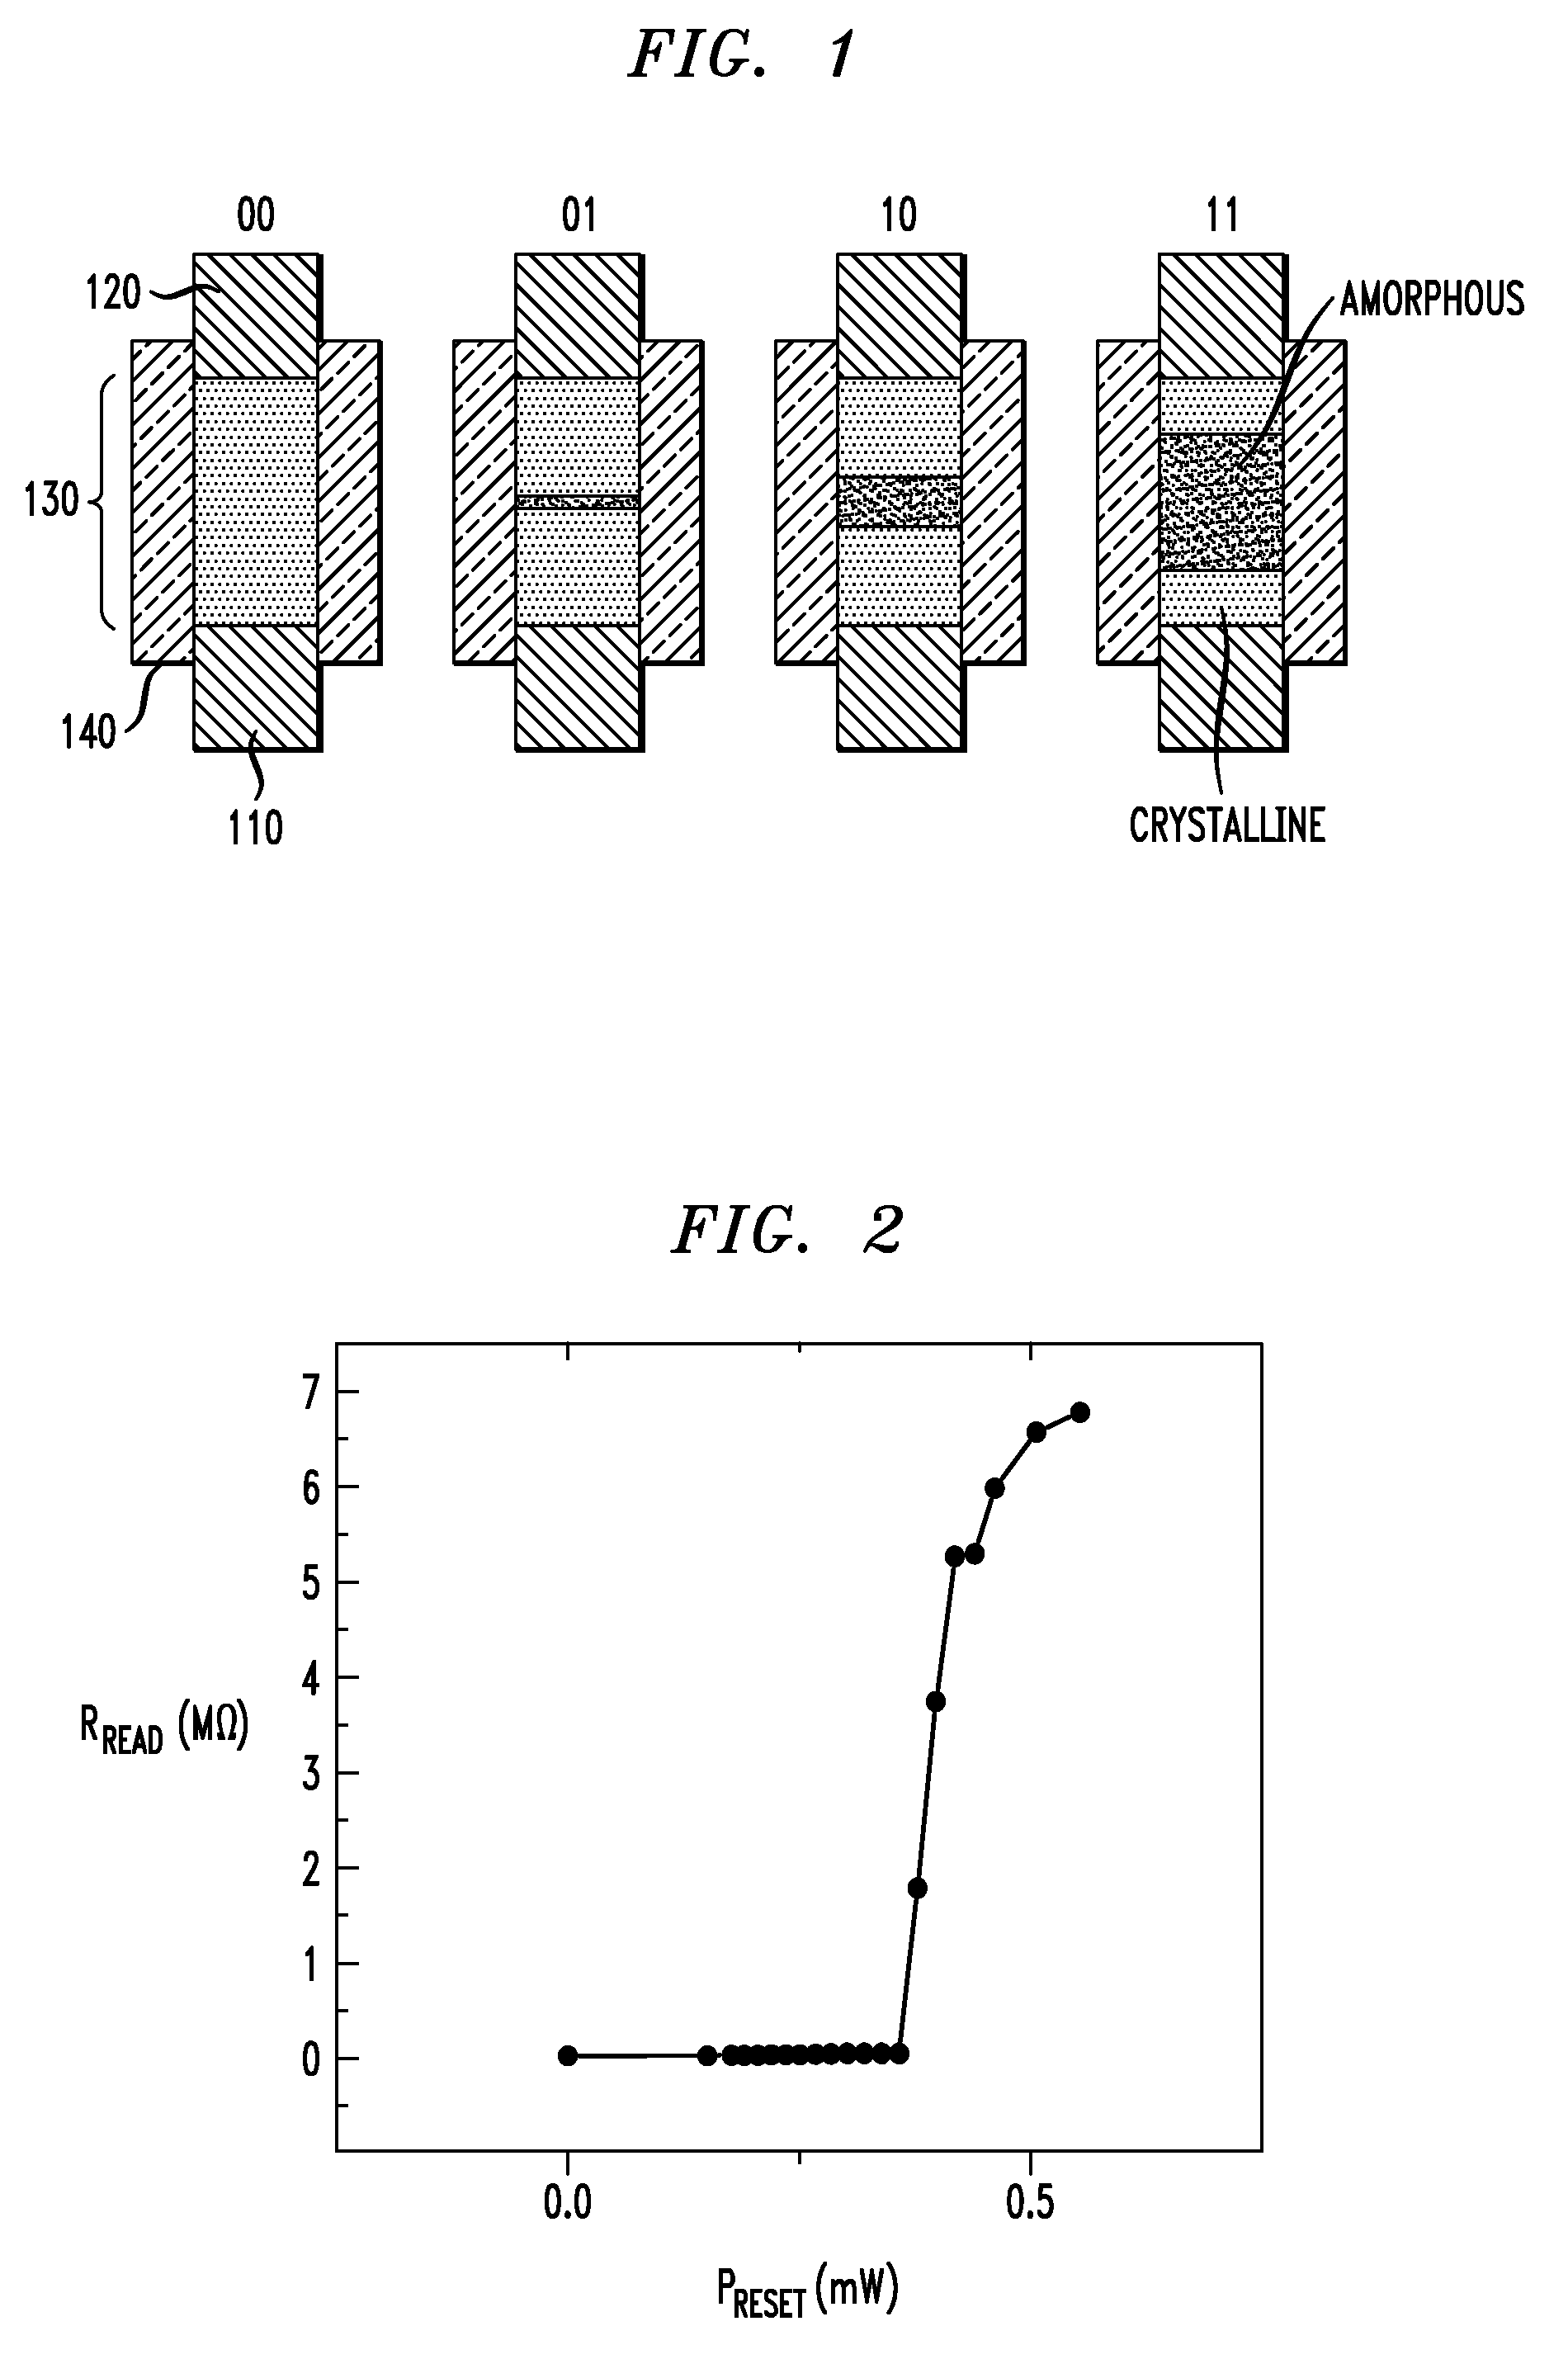 Resistance Limited Phase Change Memory Material